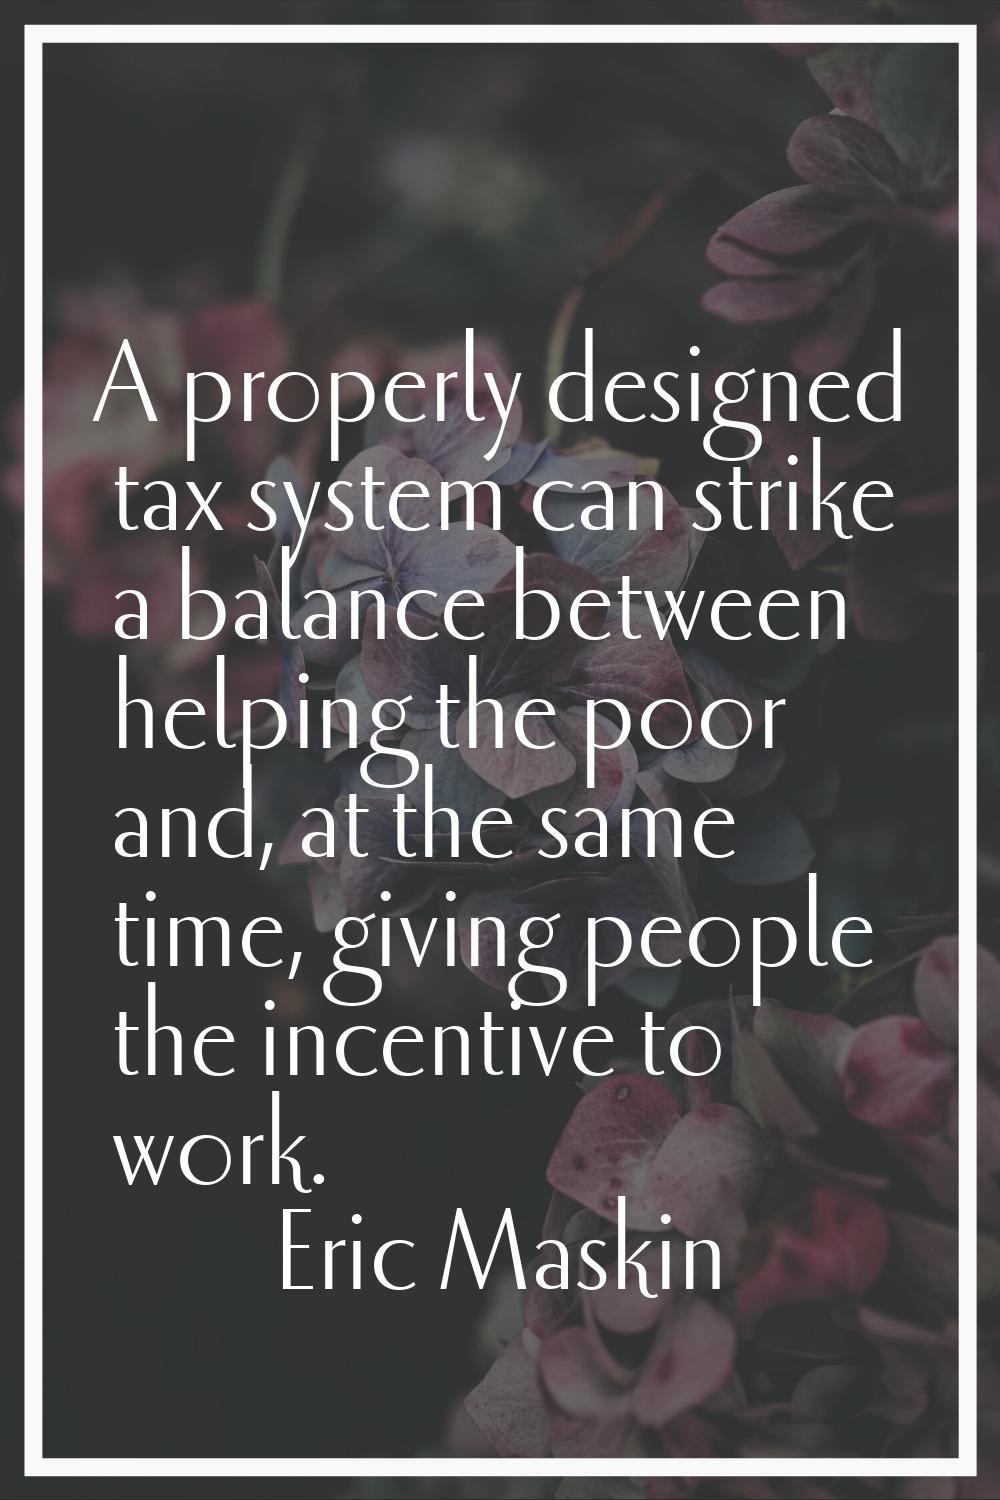 A properly designed tax system can strike a balance between helping the poor and, at the same time,